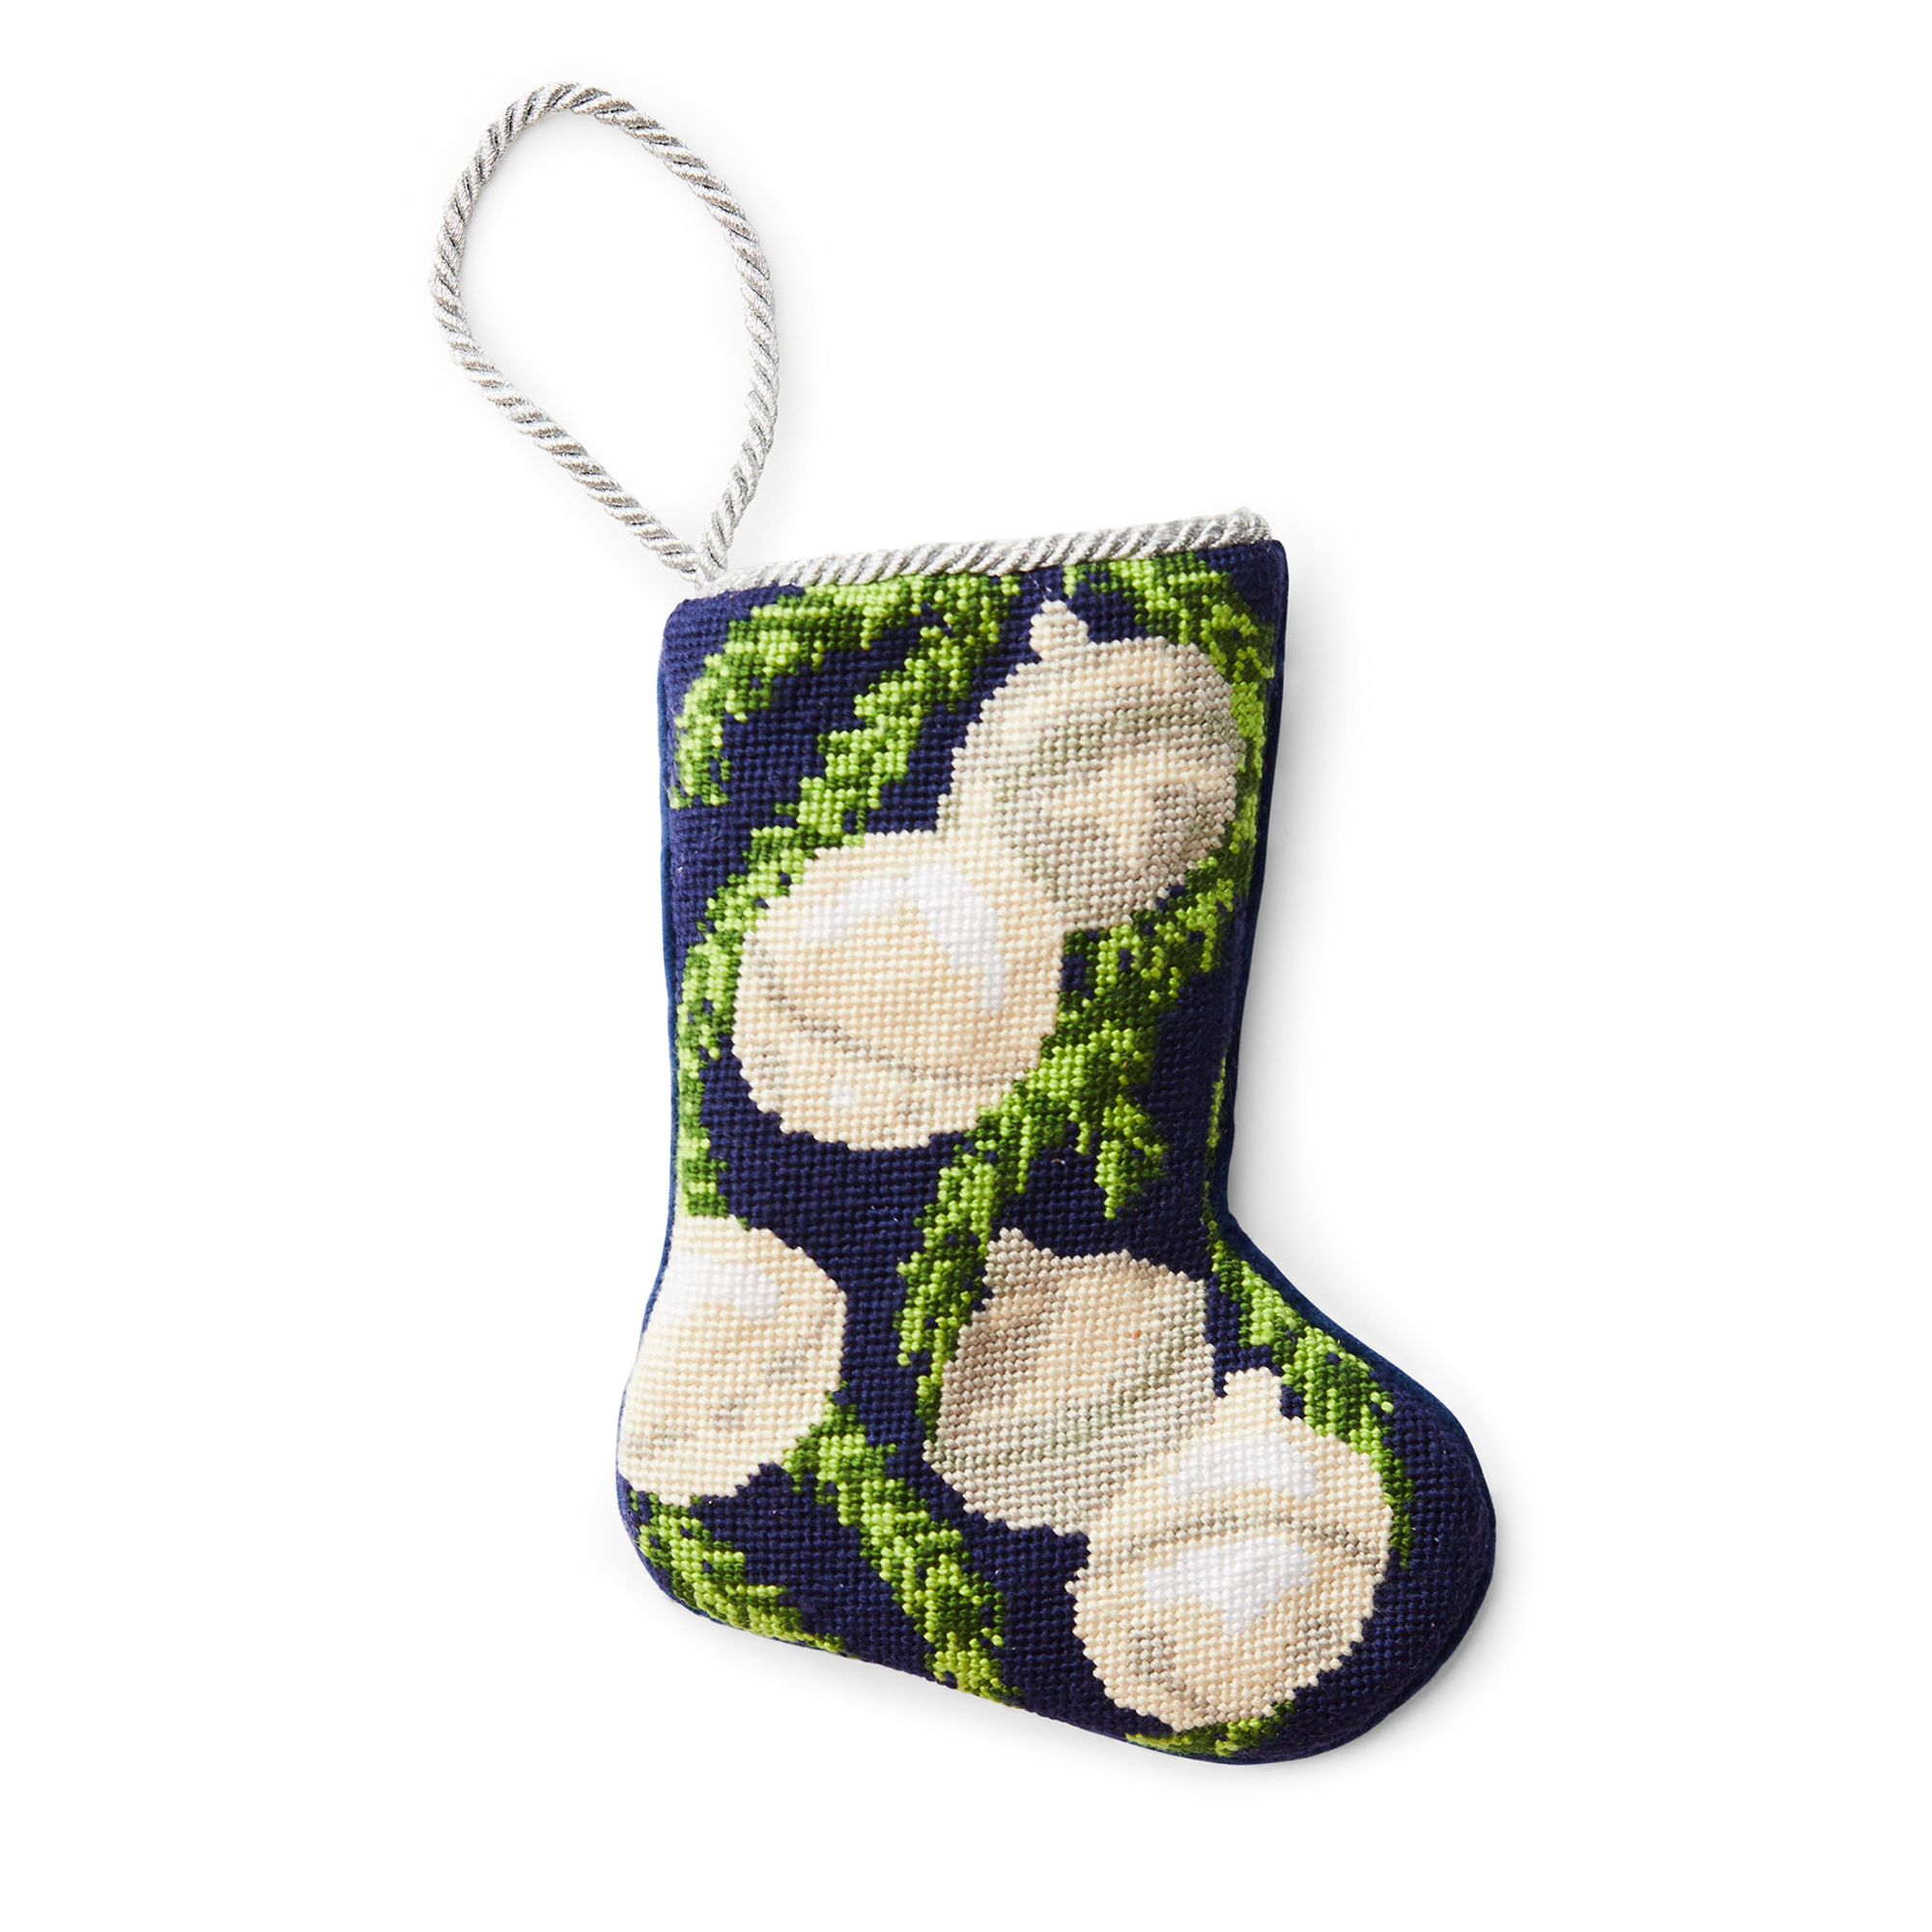 A small, intricately designed needlepoint stocking featuring silver bells against green branches and dark blue background. A gold loop at the top makes it perfect as a tree ornament, place setting, or for hanging by the fireplace. 